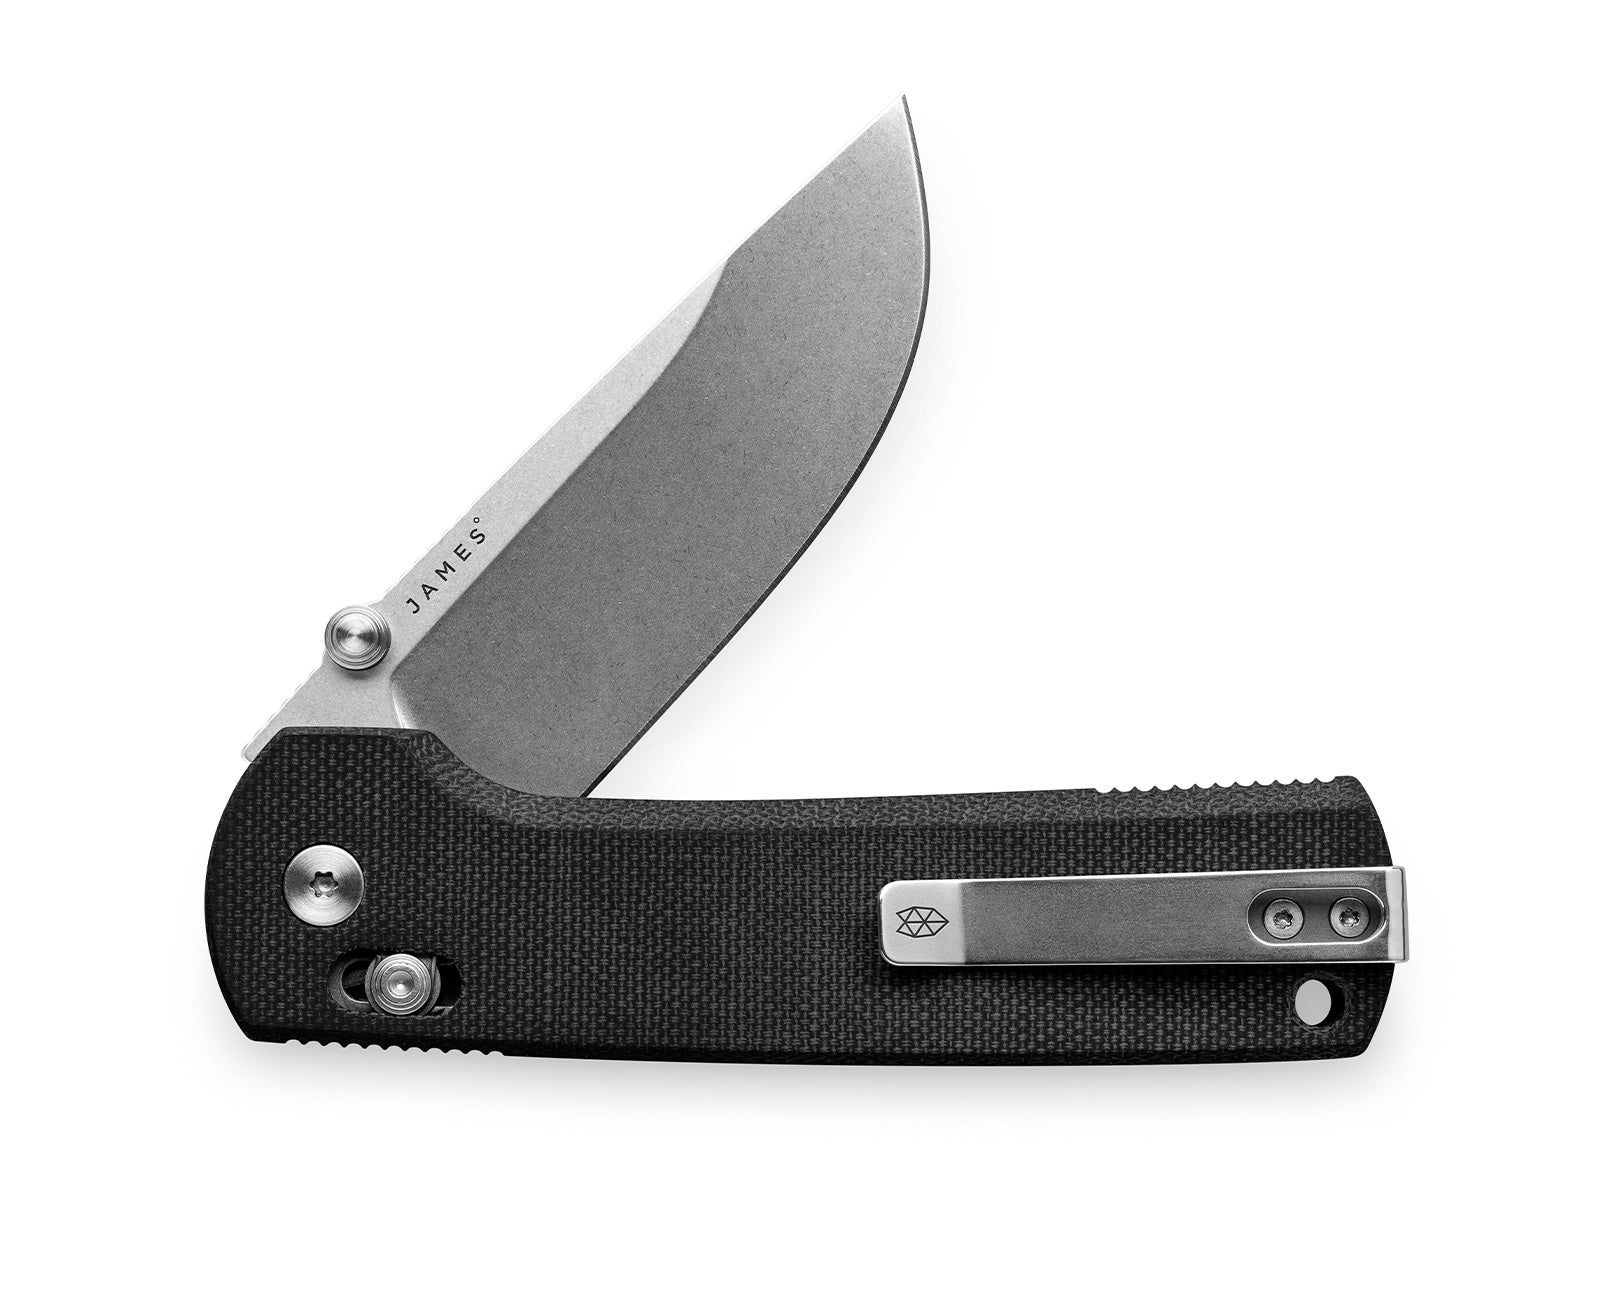 The Kline knife with black micarta handle and stainless steel blade.